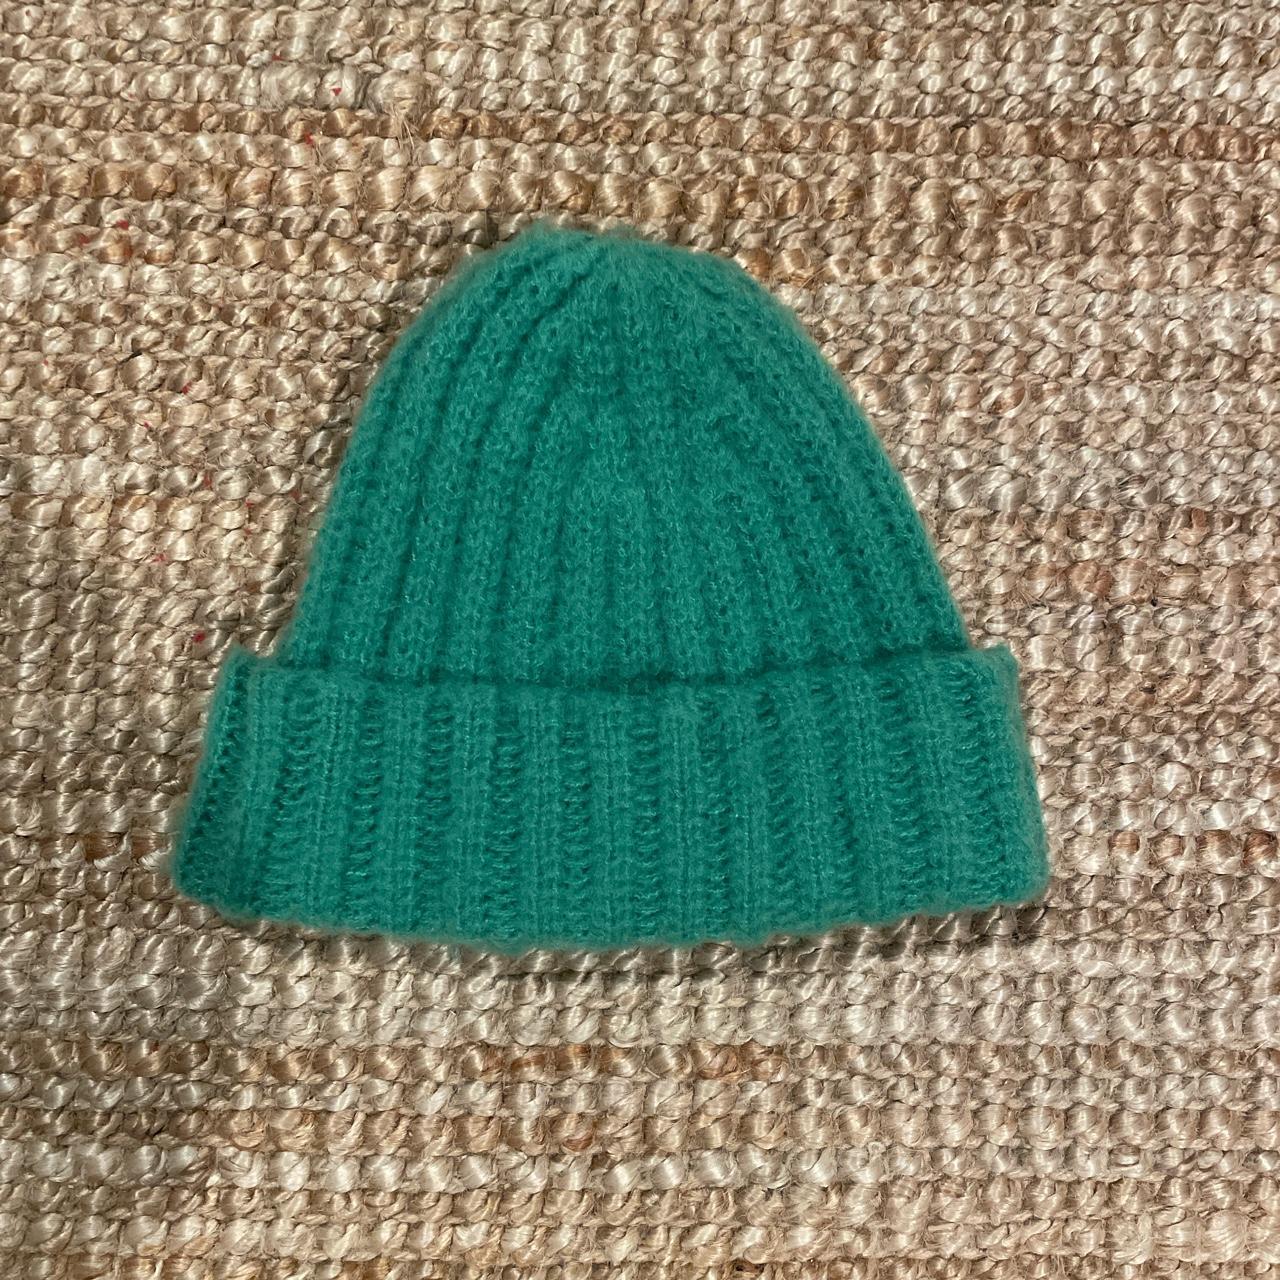 oak and fort chunky green beanie. second photo shows... - Depop